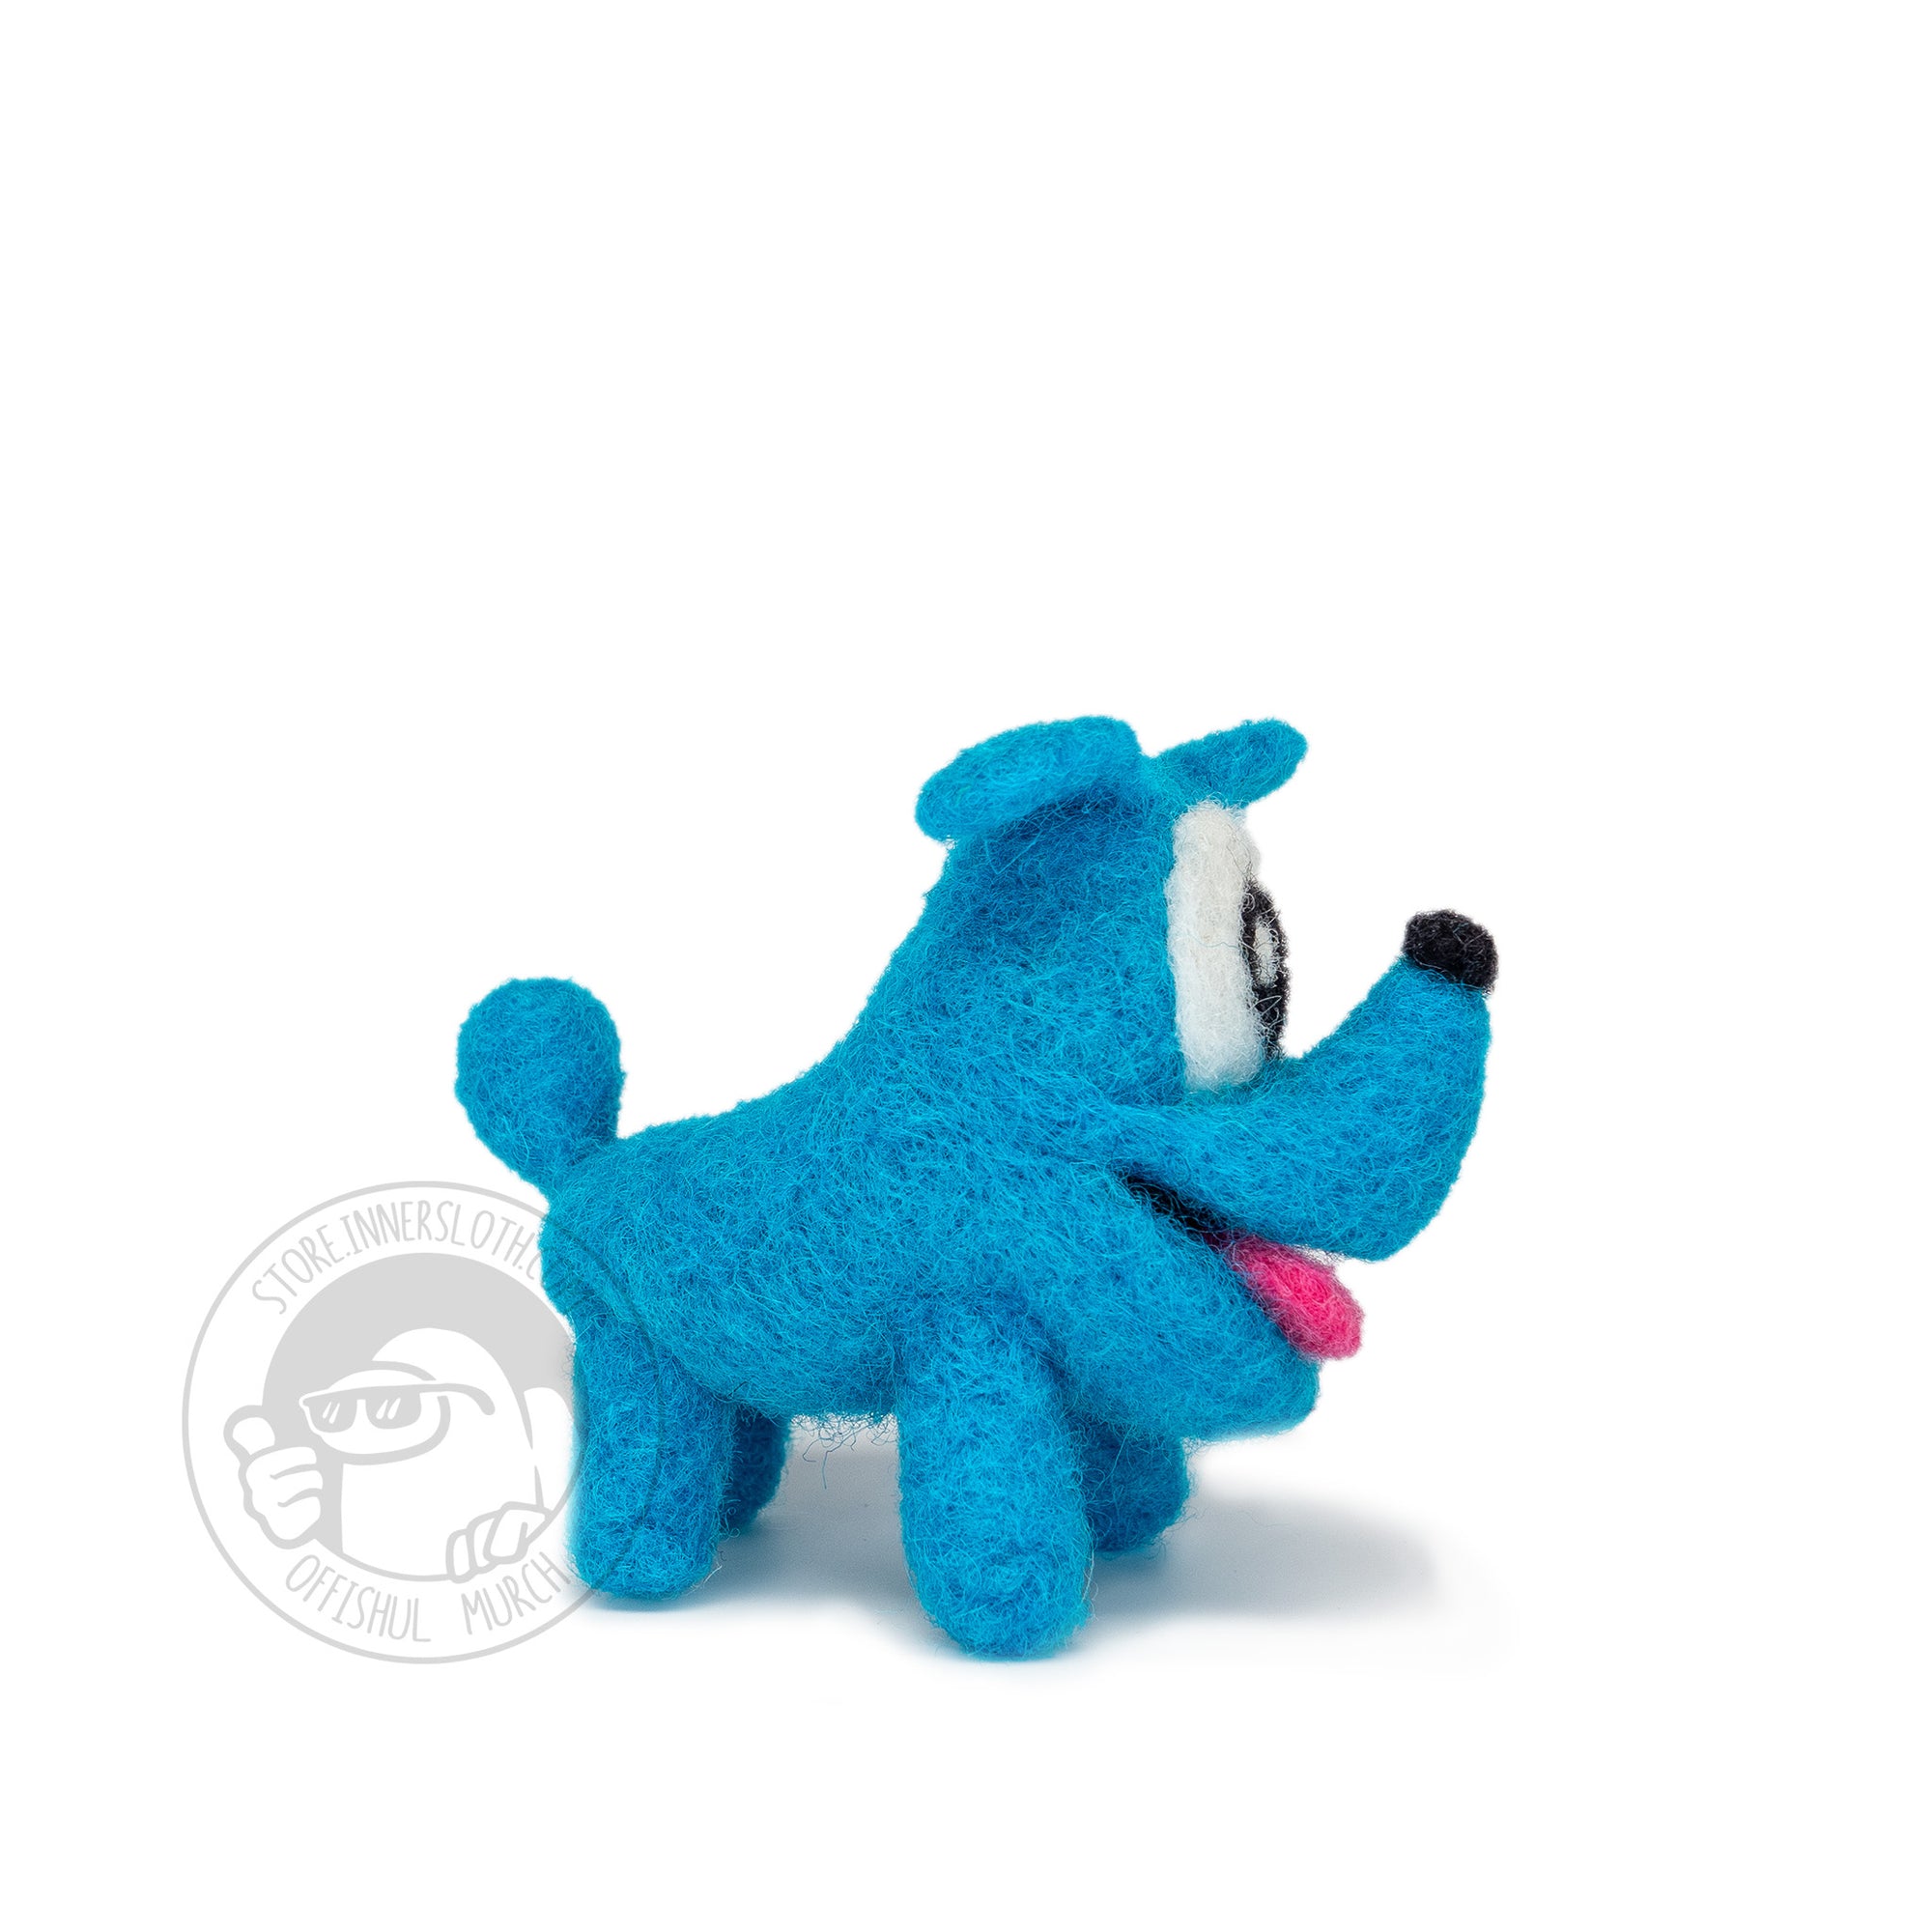 A photograph of the Needle Felted Mini Space Dog by Amarte Studio standing in a ¾ view looking left on a white background. 